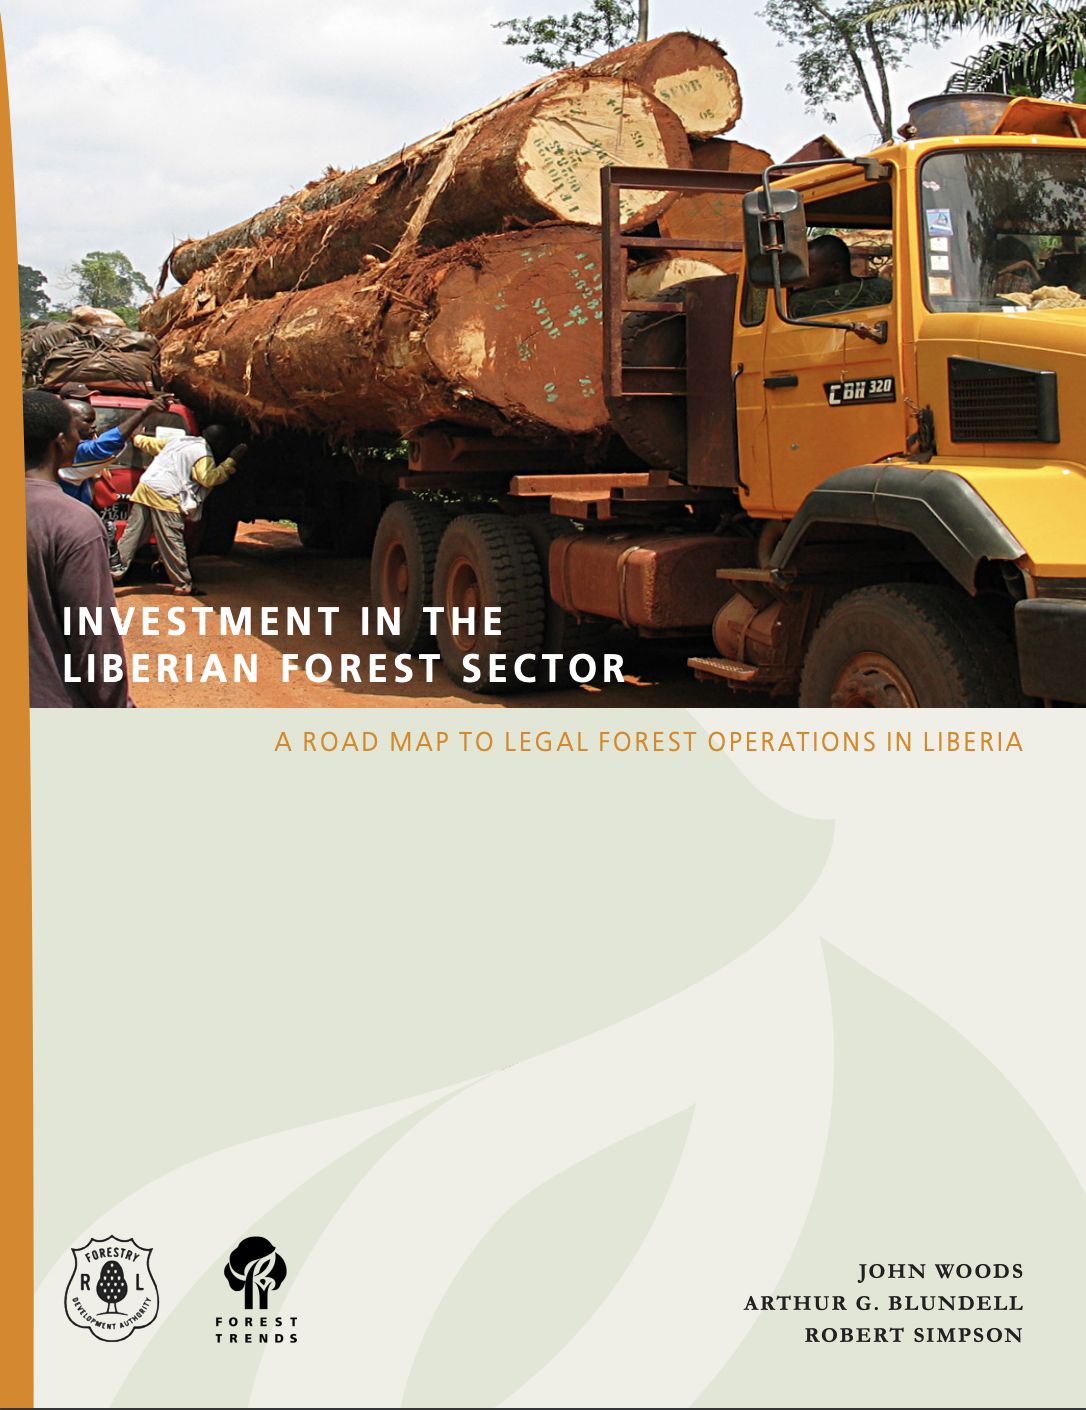 INVESTMENT IN THE LIBERIAN FOREST SECTOR: A Road Map to Legal Forest Operations in Liberia